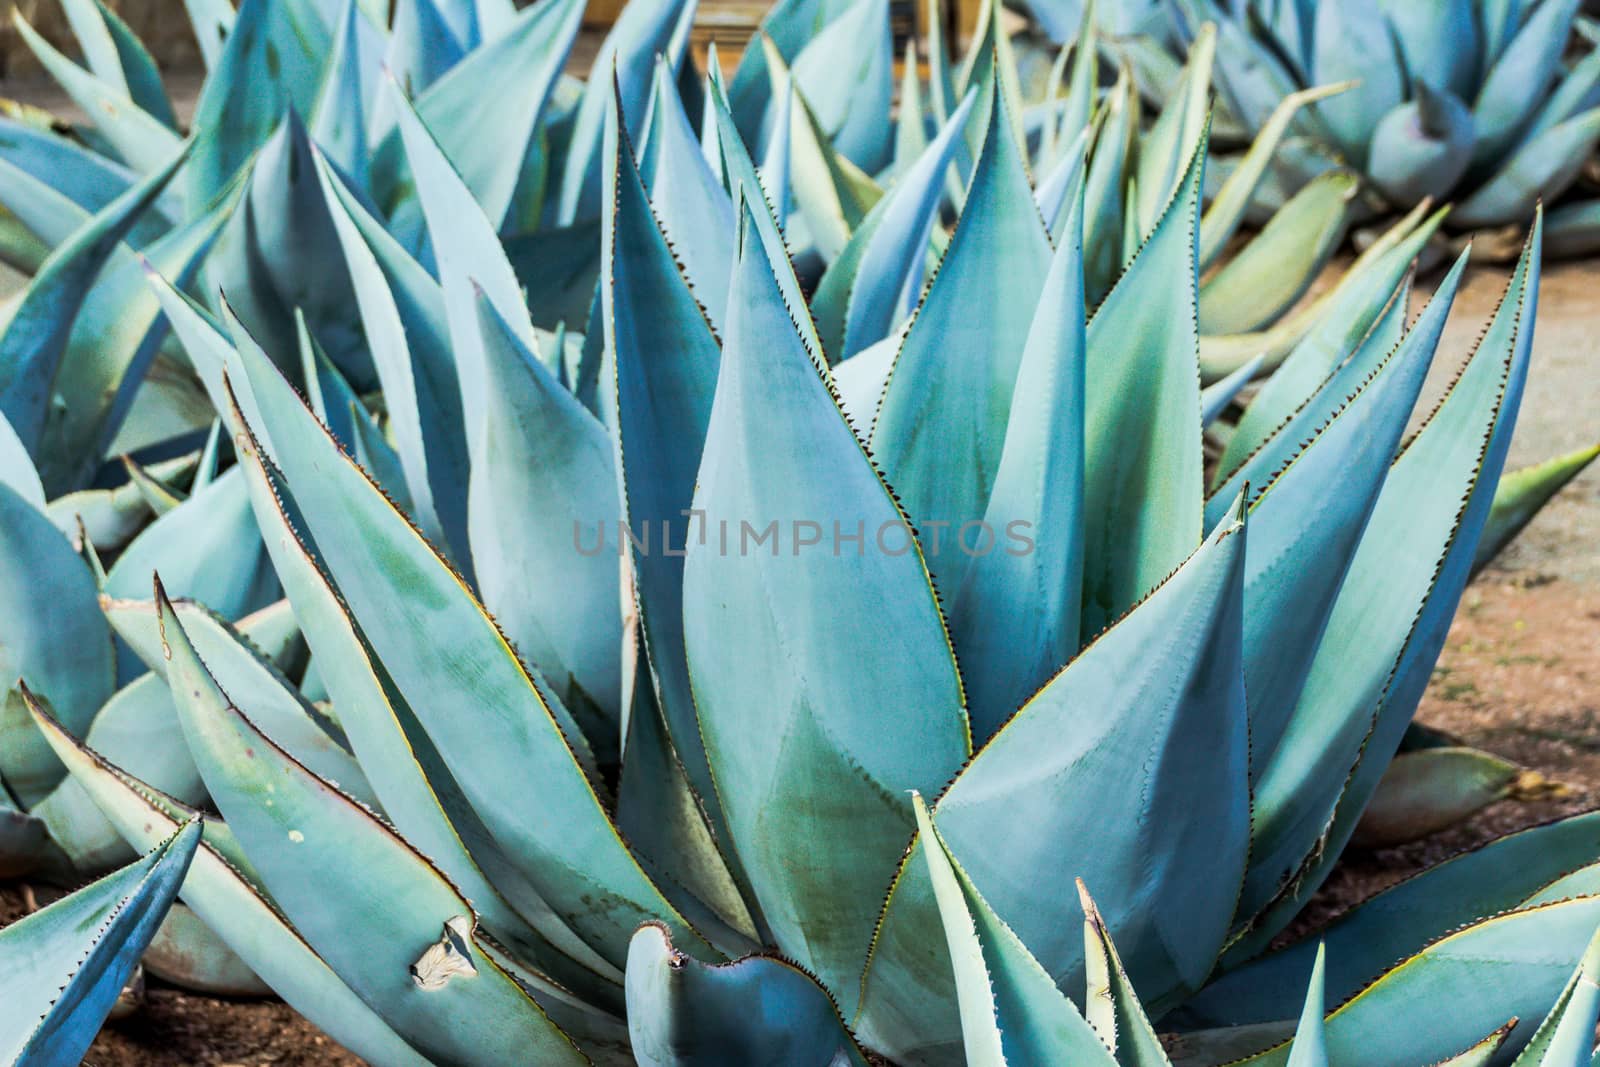 Photograph of some Green maguey traditional nativr mexican plants